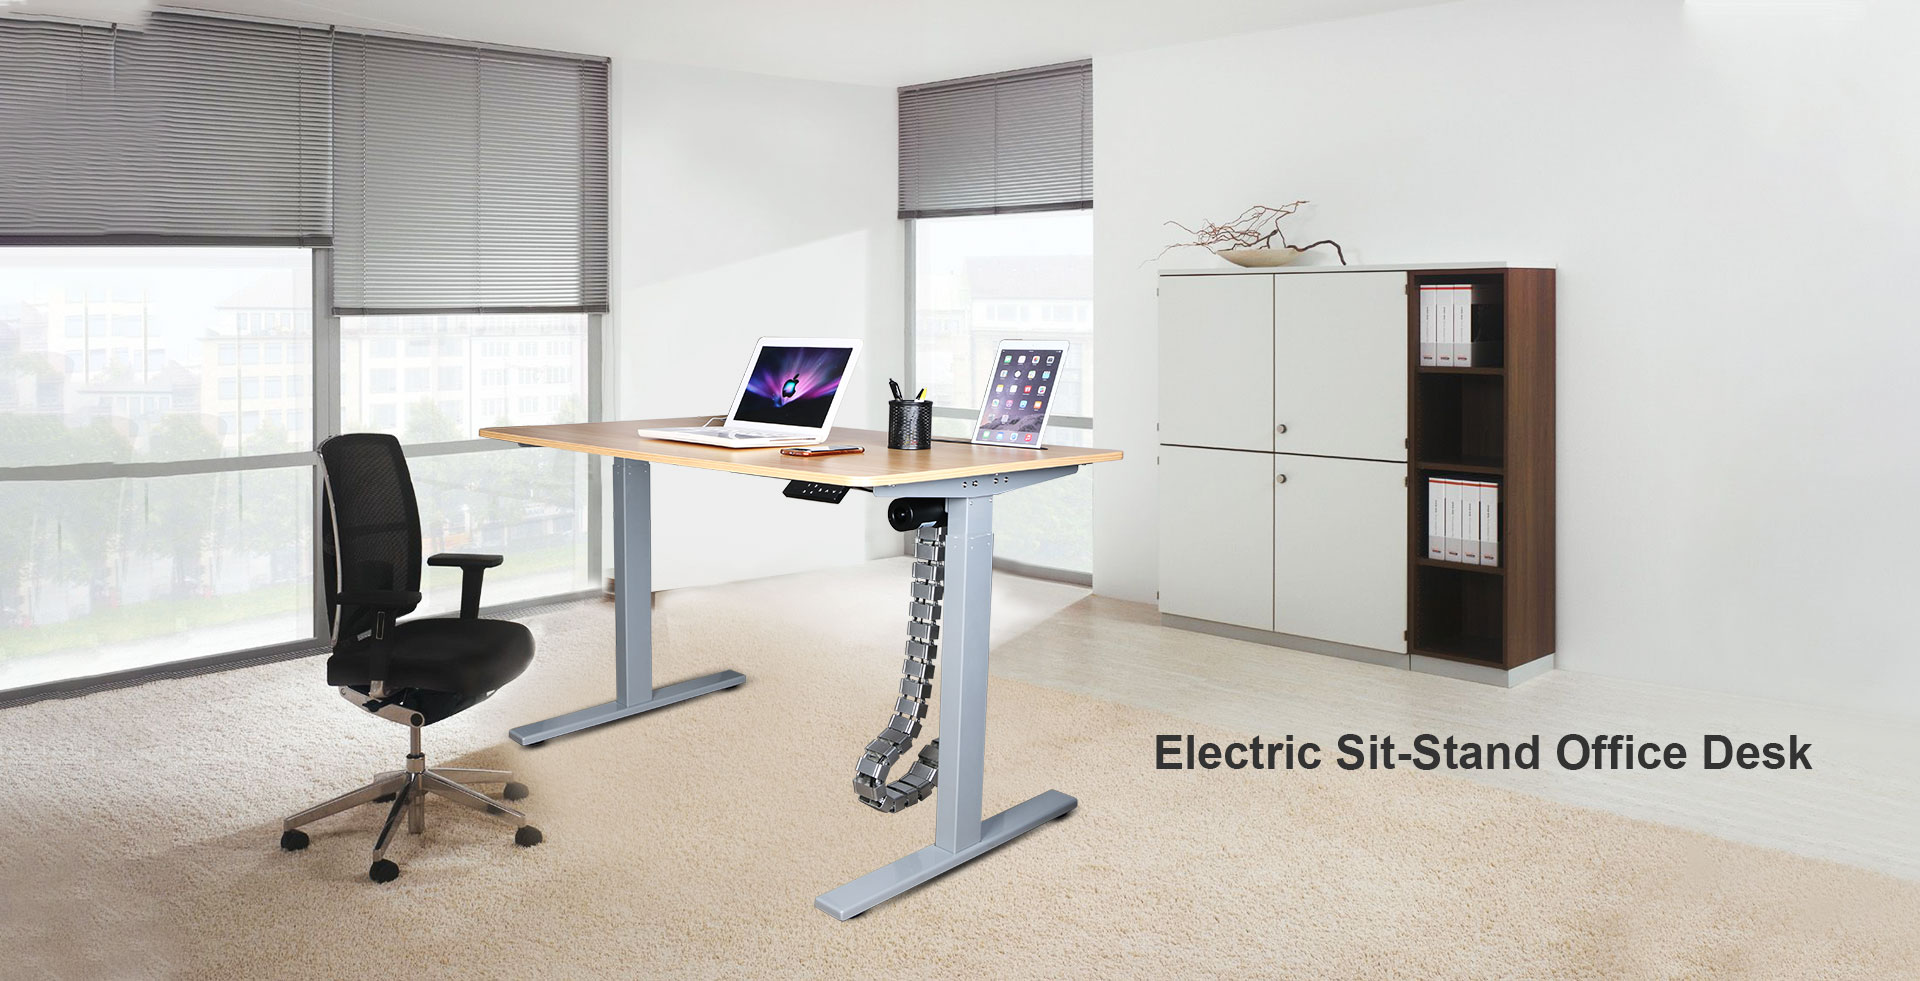 Electric Sit-Stand office Desk